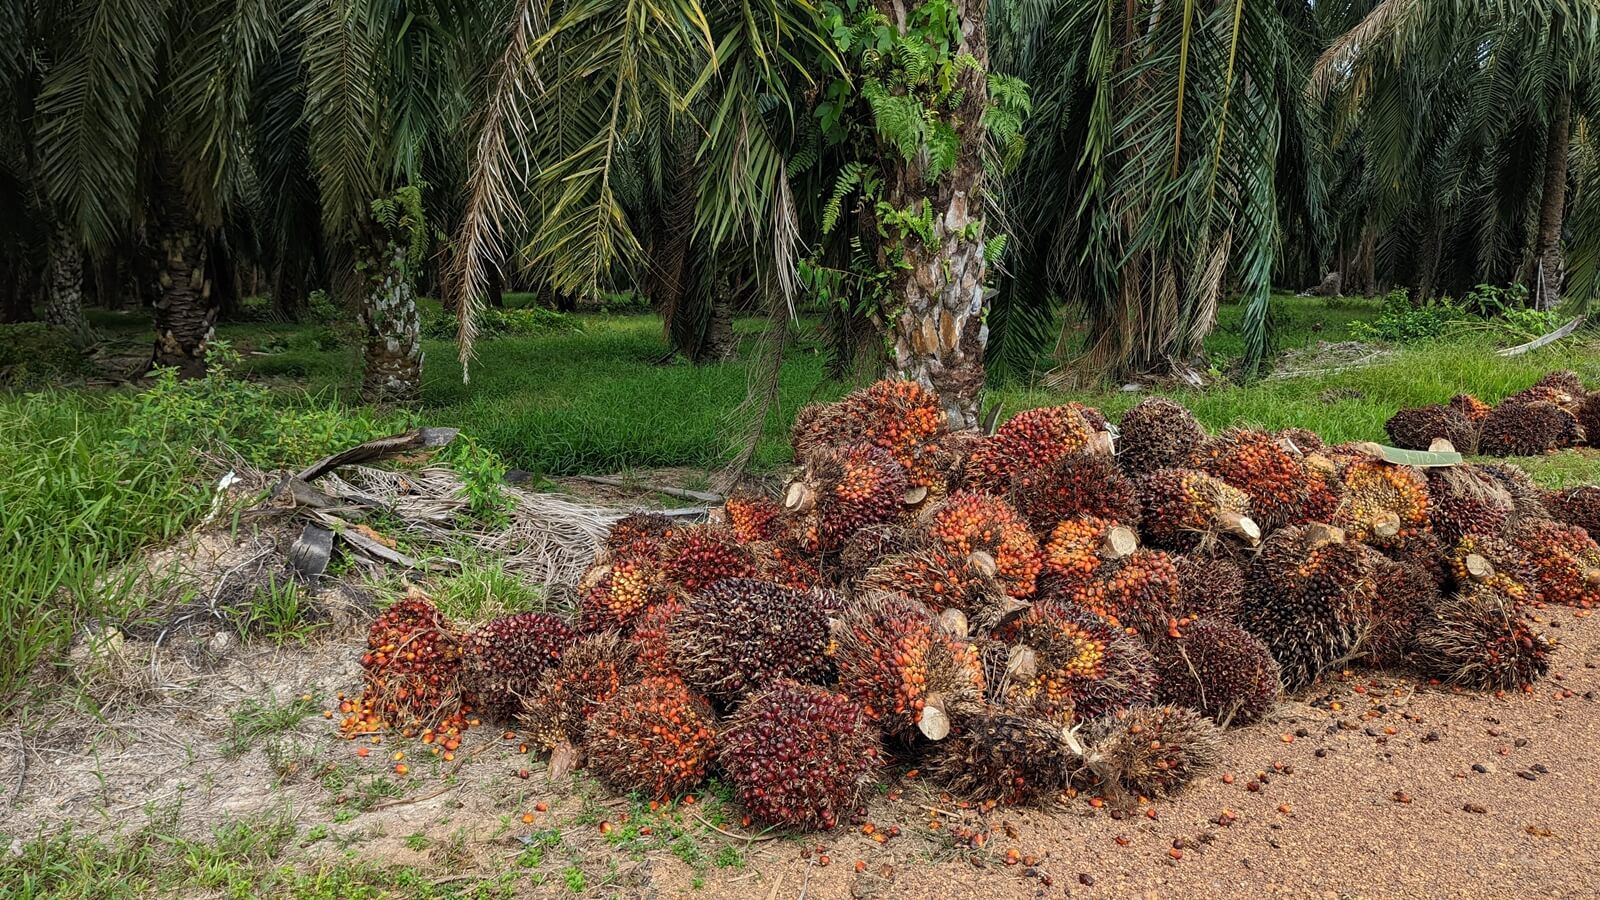 Oil palm fruits ready to be collected in the Johor Farmers’ Organisation plantation. (Credit: YH Law)